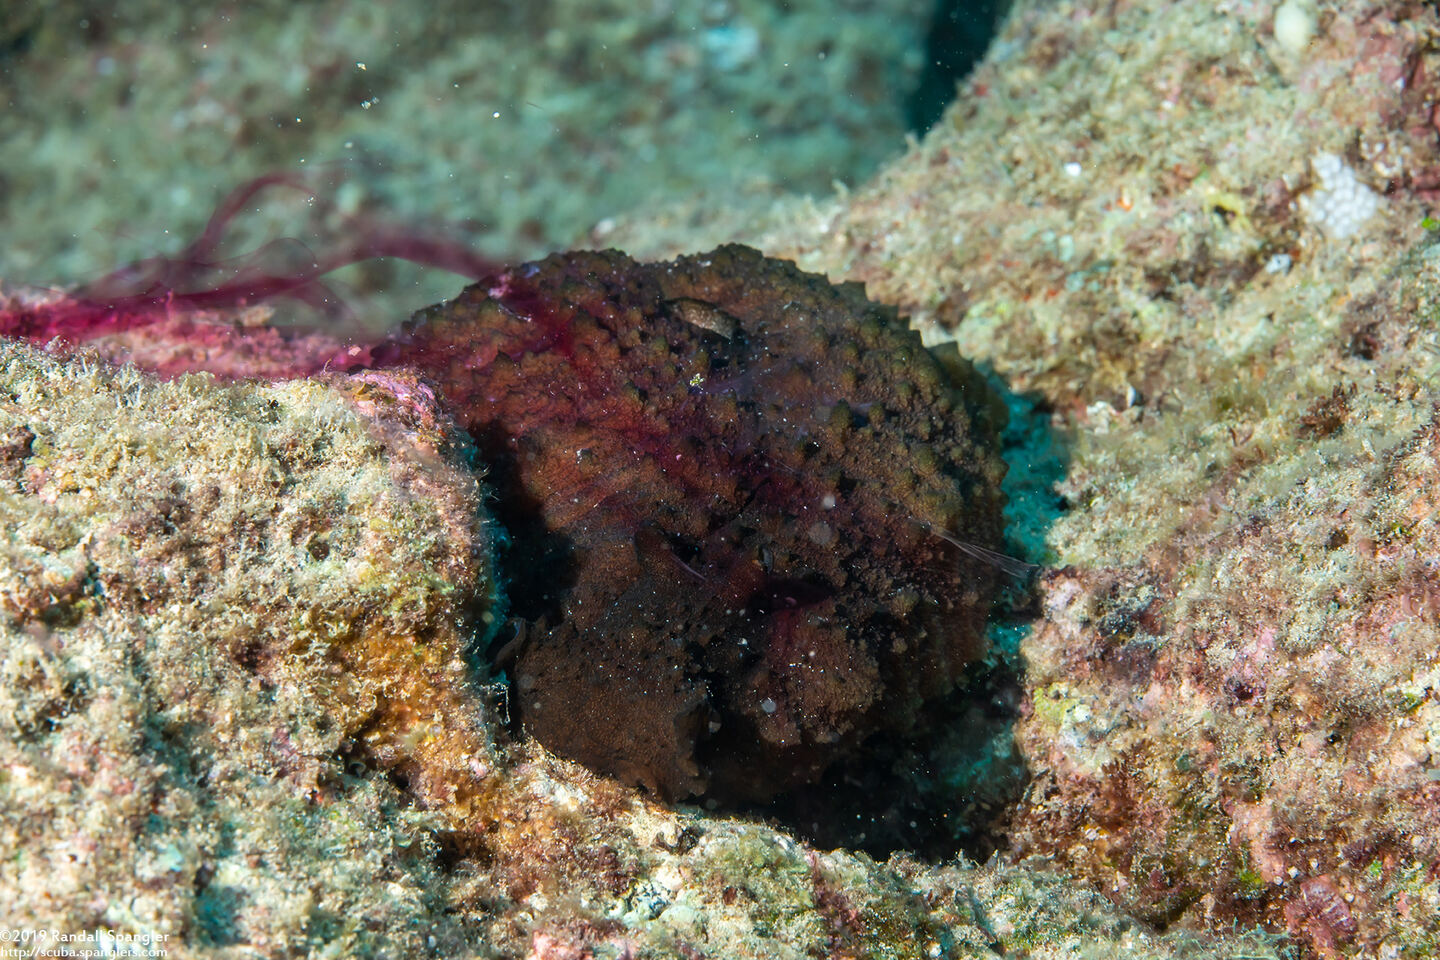 Dolabella auricularia (Eared Sea Hare); It squirts purple ink when disturbed